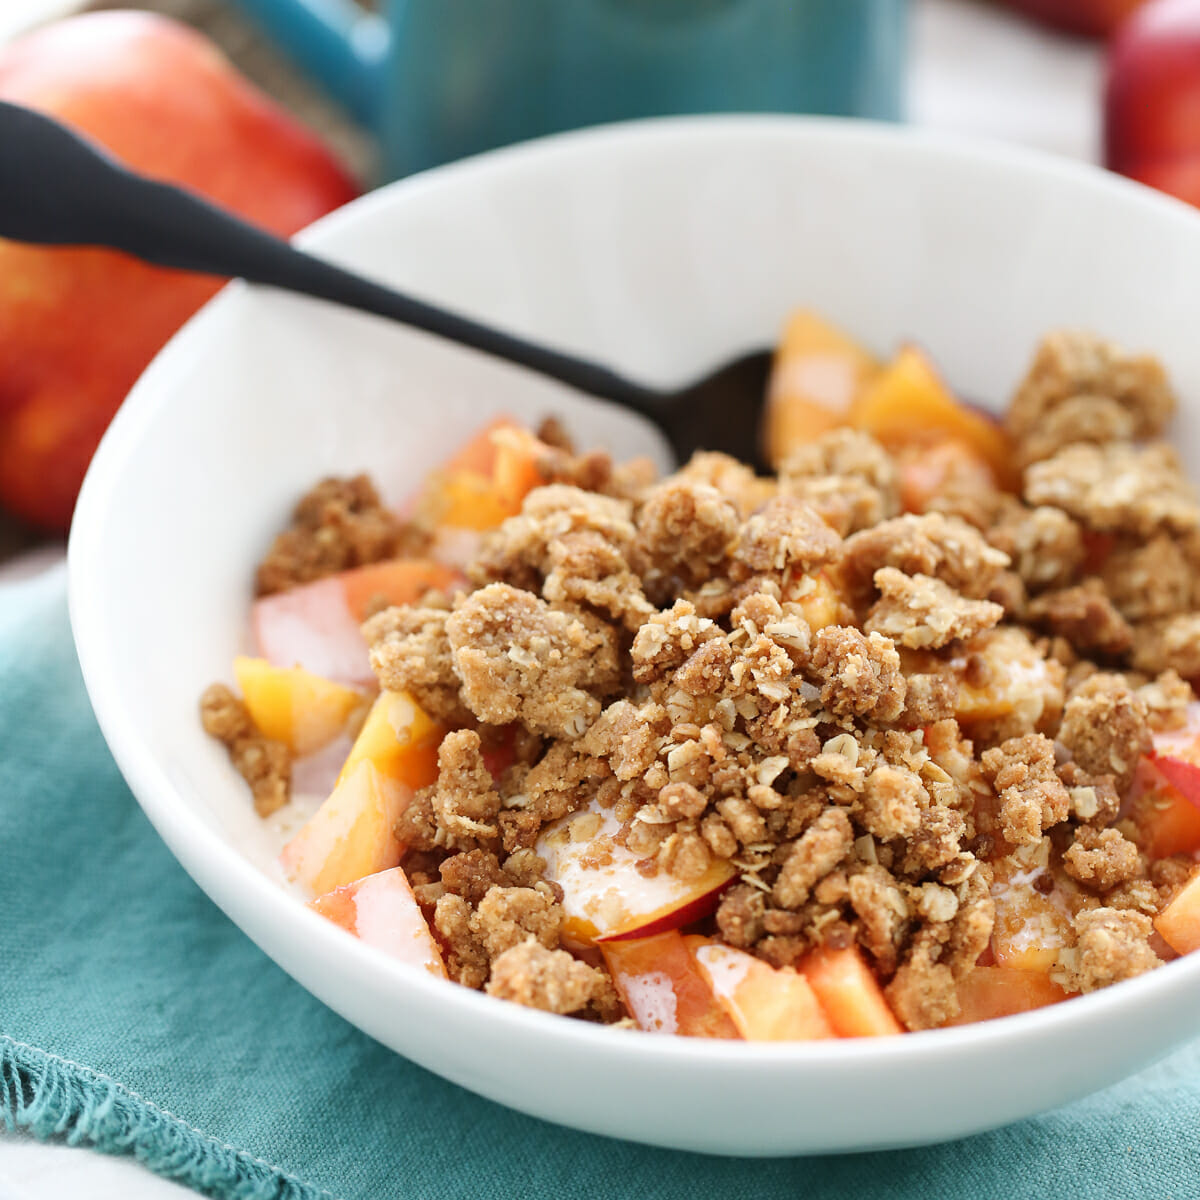 crumble topping over peaches and cream